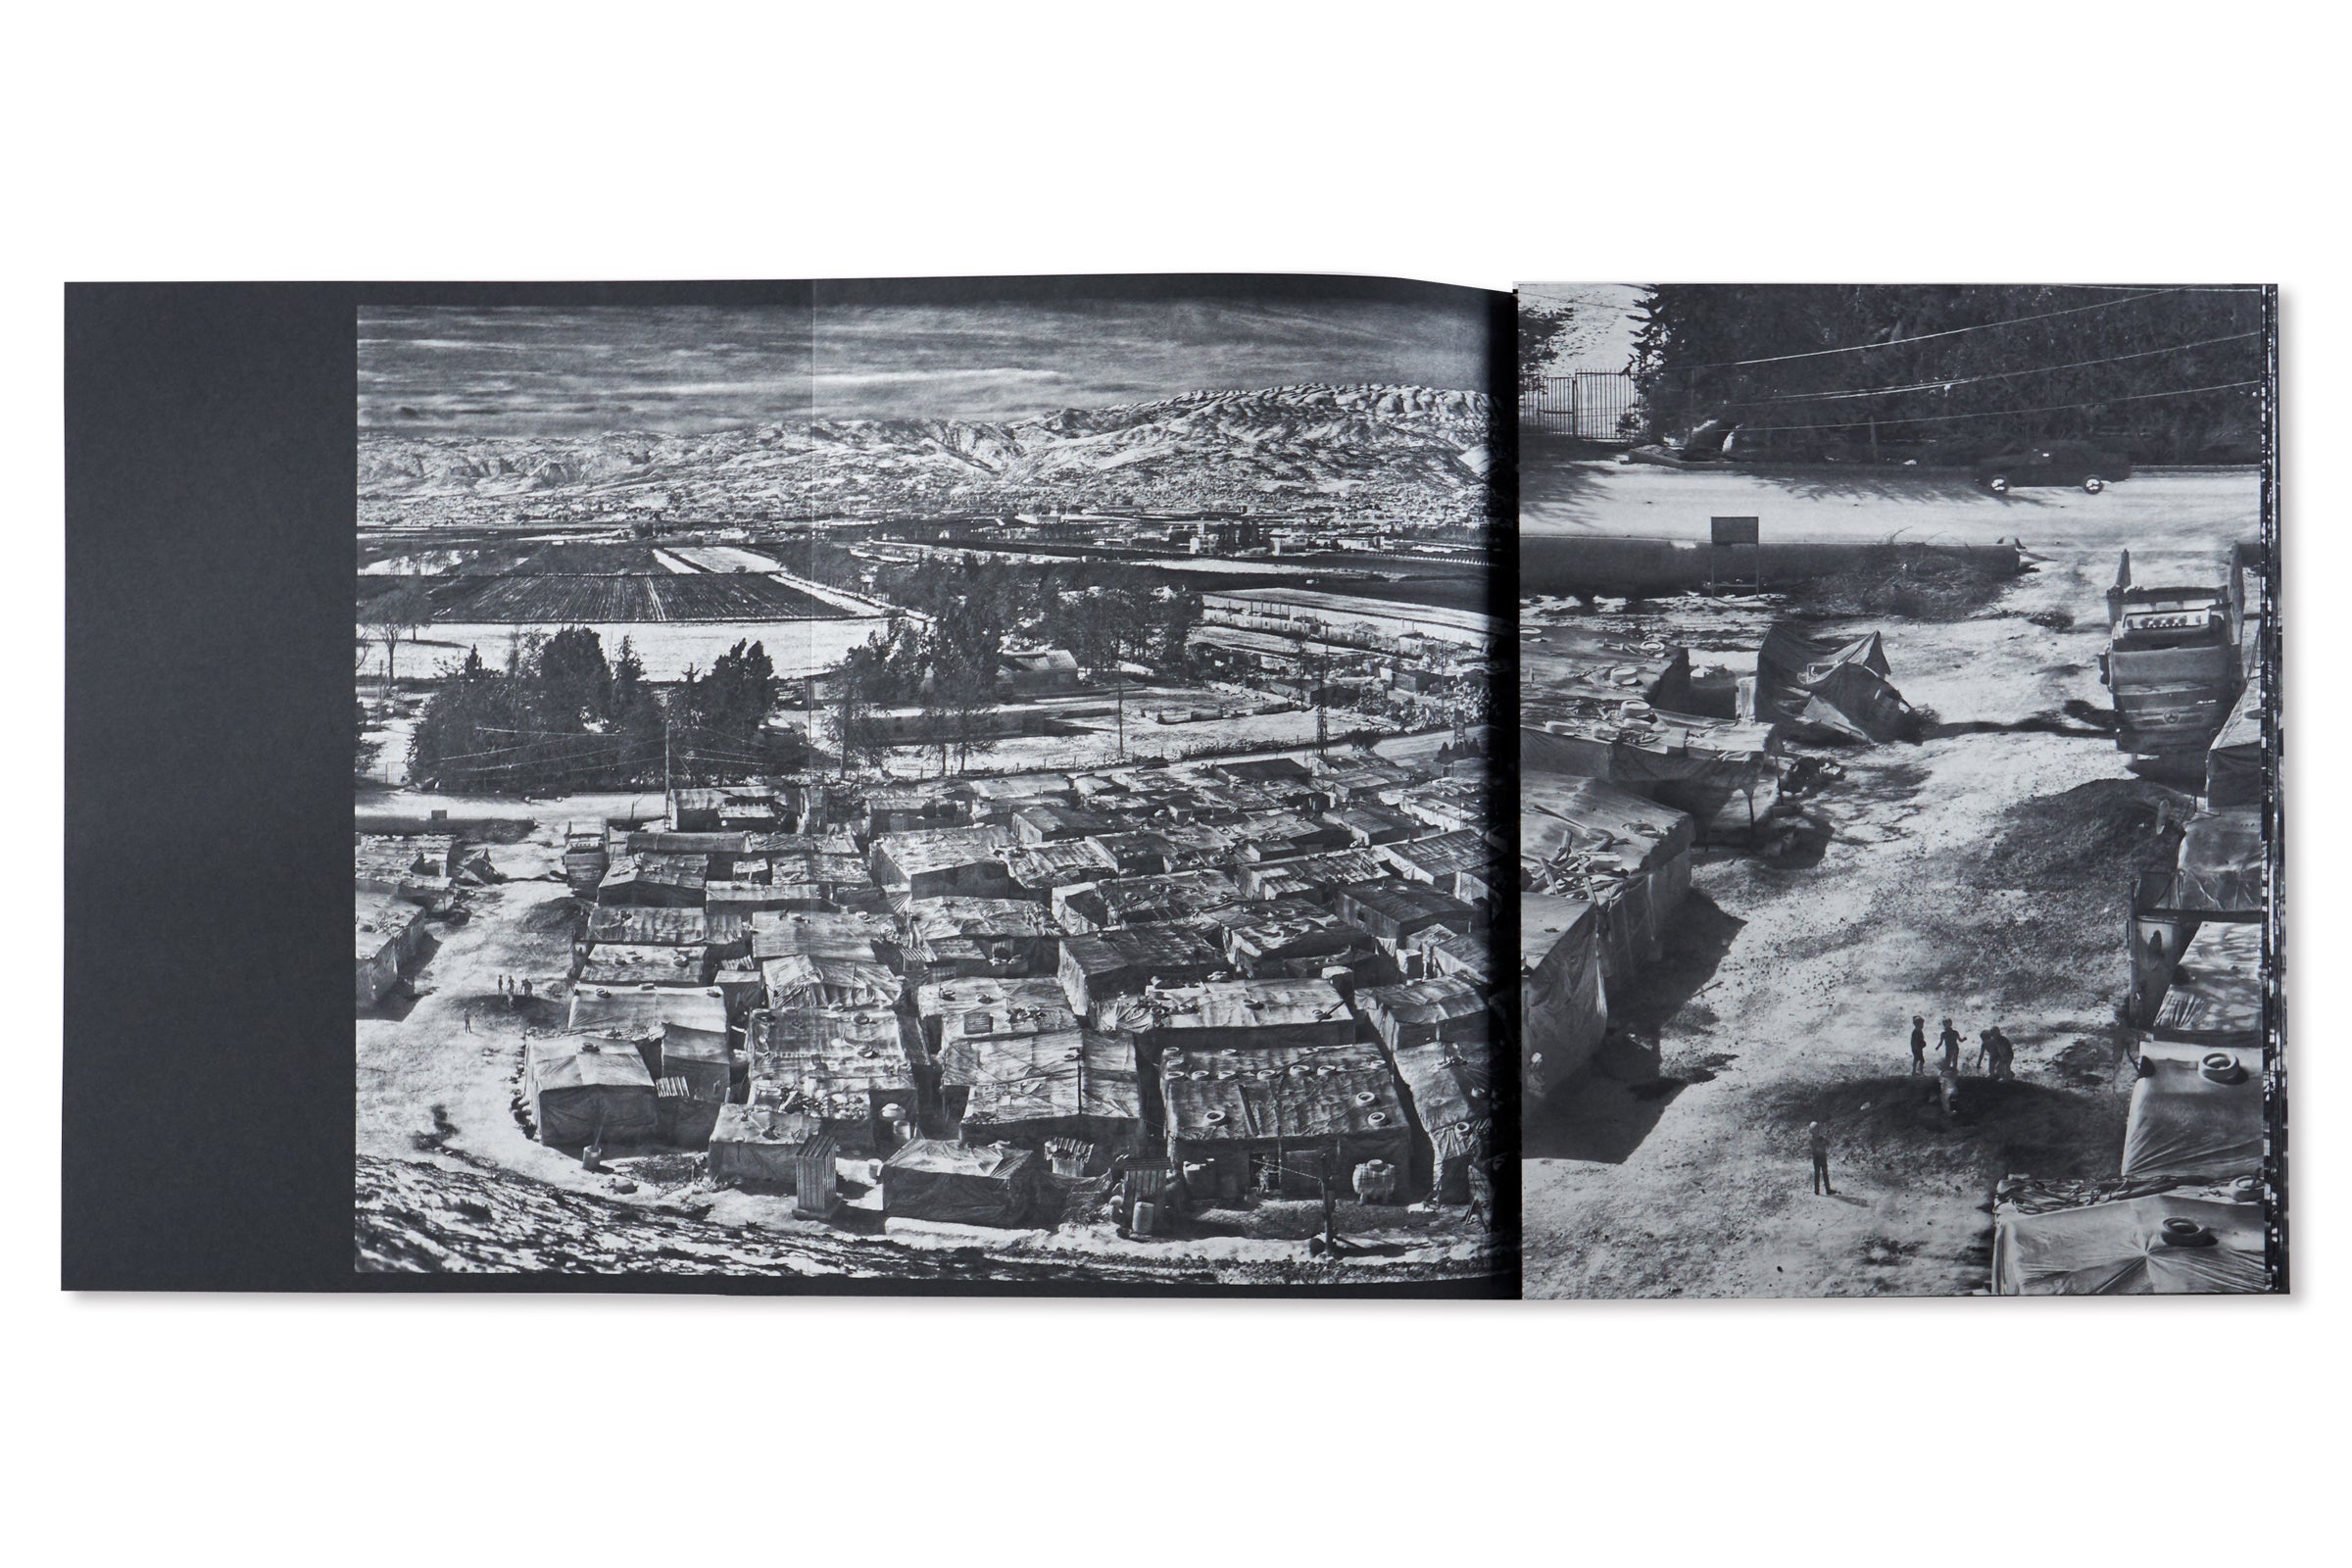 THE CASTLE by Richard Mosse [FIRST EDITION, SECOND PRINTING]